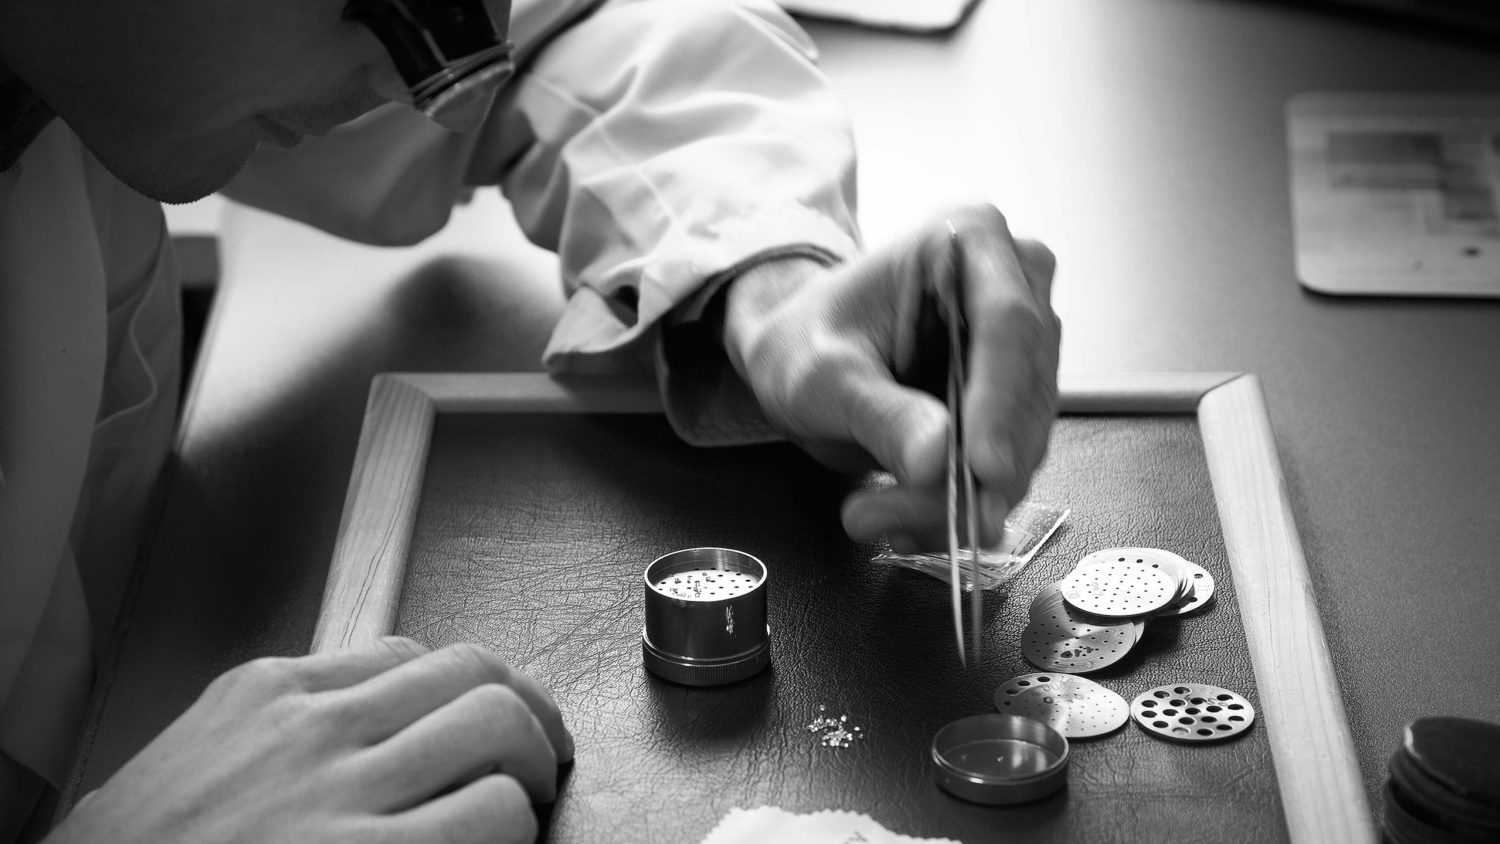 The art of watchmaking is something we take to heart here in Tramelan. We do it all ourselves, from start to finish, ensuring quality and perfection at every step. Every stage of the process is handled by experienced hands. Armand Nicolet's master watchmakers dedicate years of passion, study, and practice to perfect their craft. Their work is a true labor of love, reflected in every watch they create.